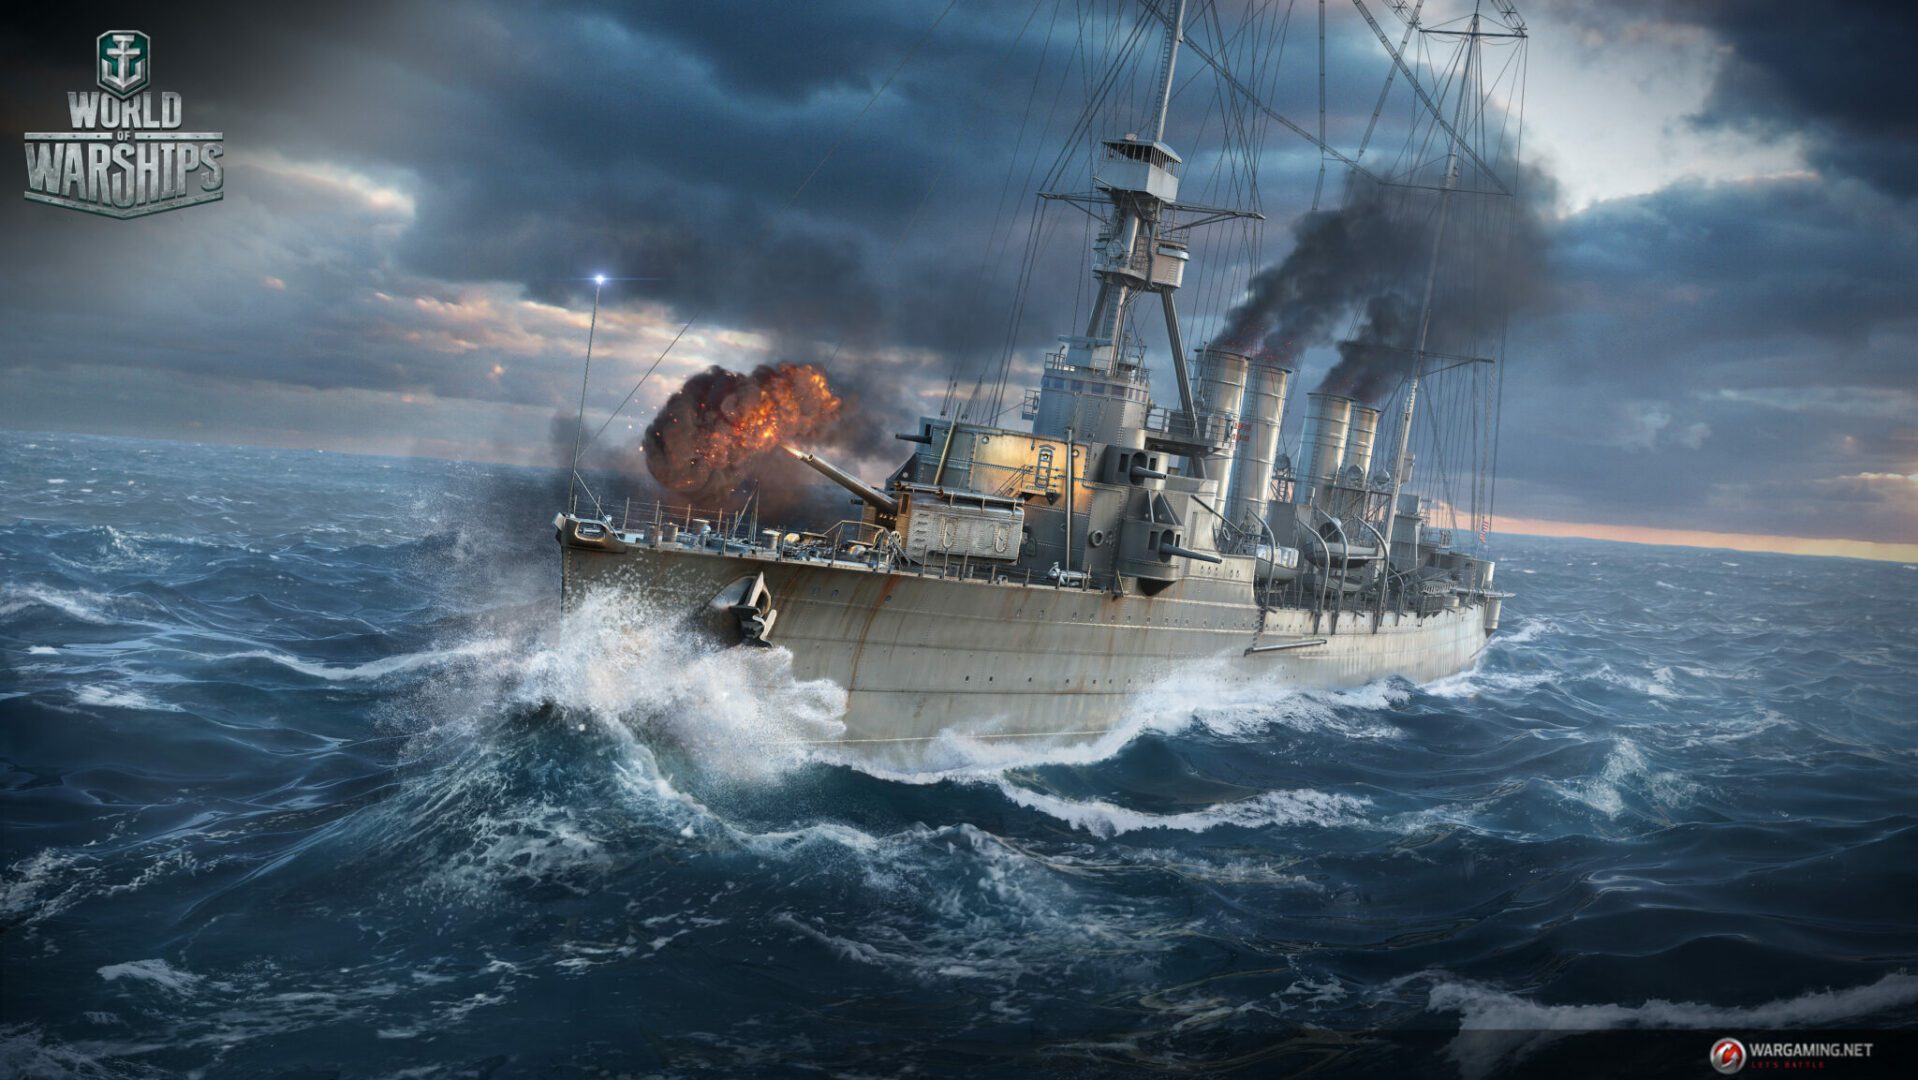 Exclusive War of Warships Items Up For Grabs